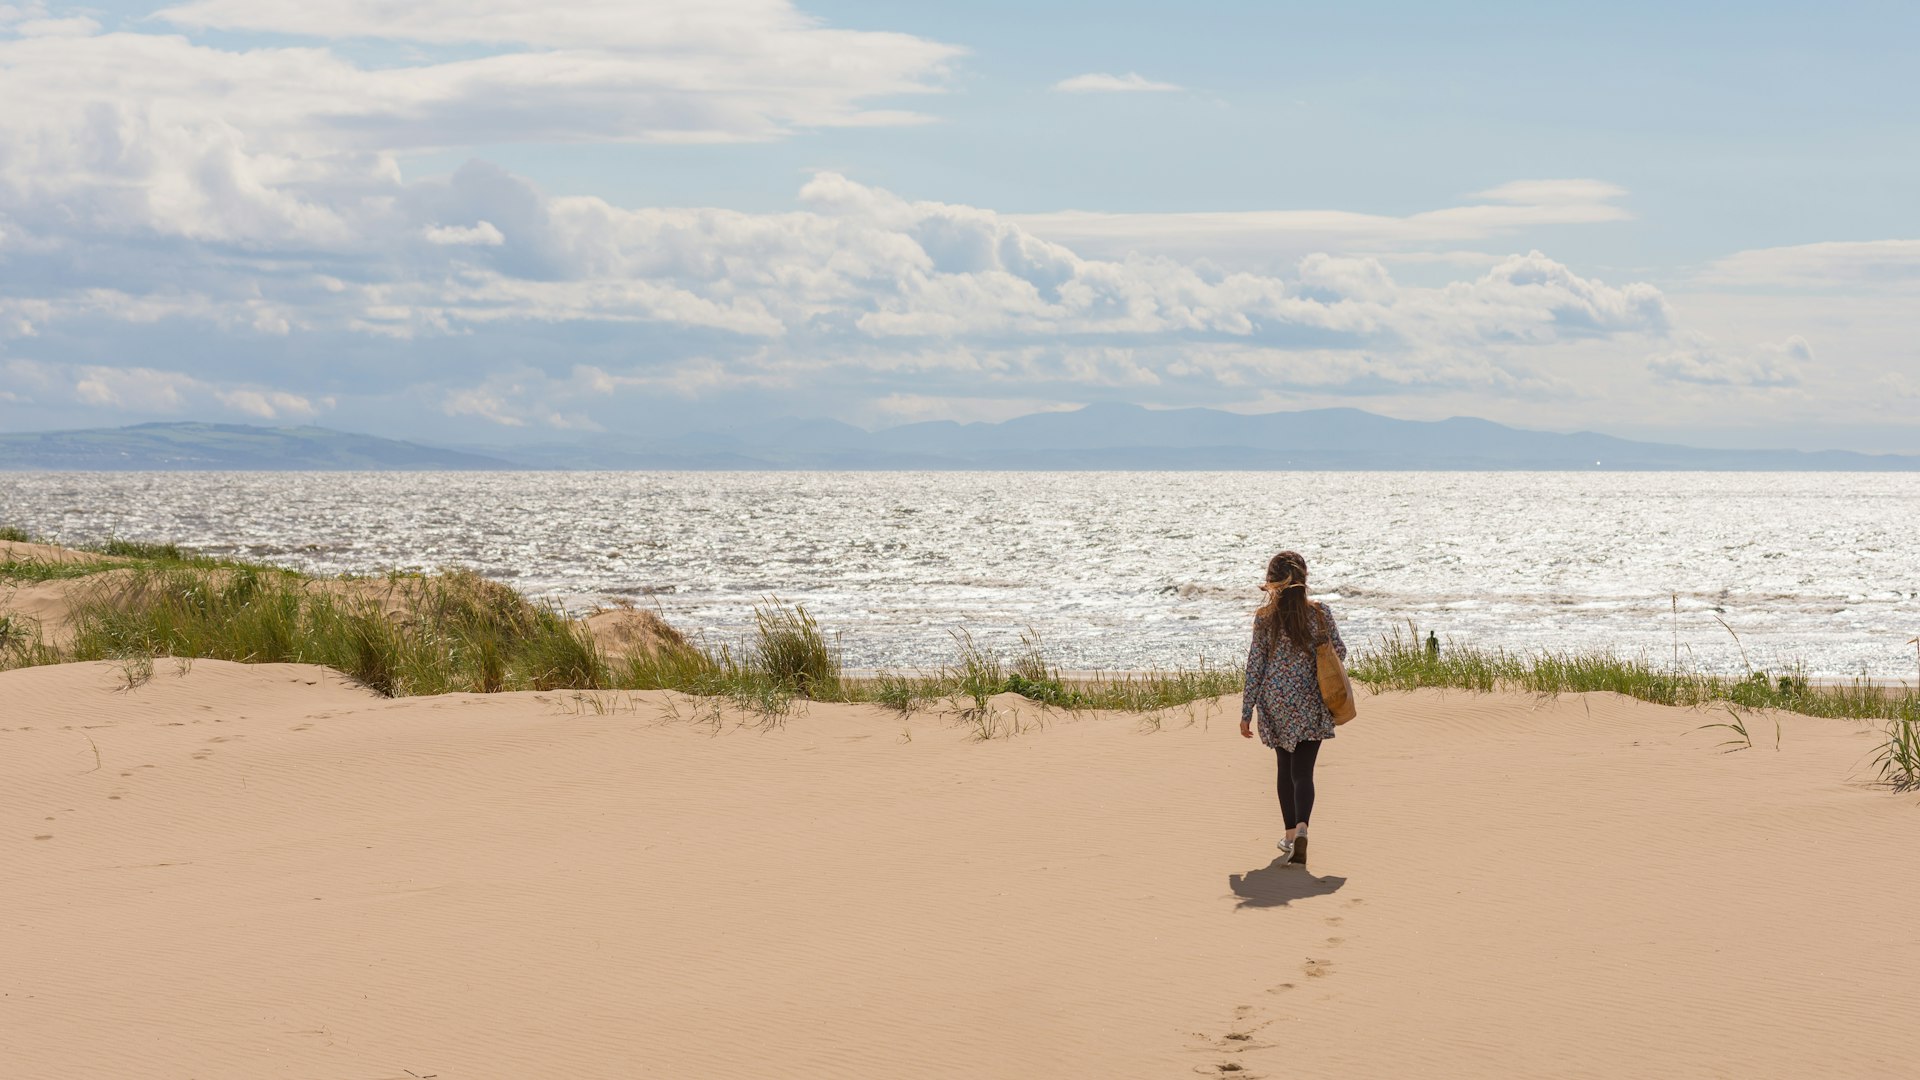 A woman walks on a sand dune to get a view of the north see in the background